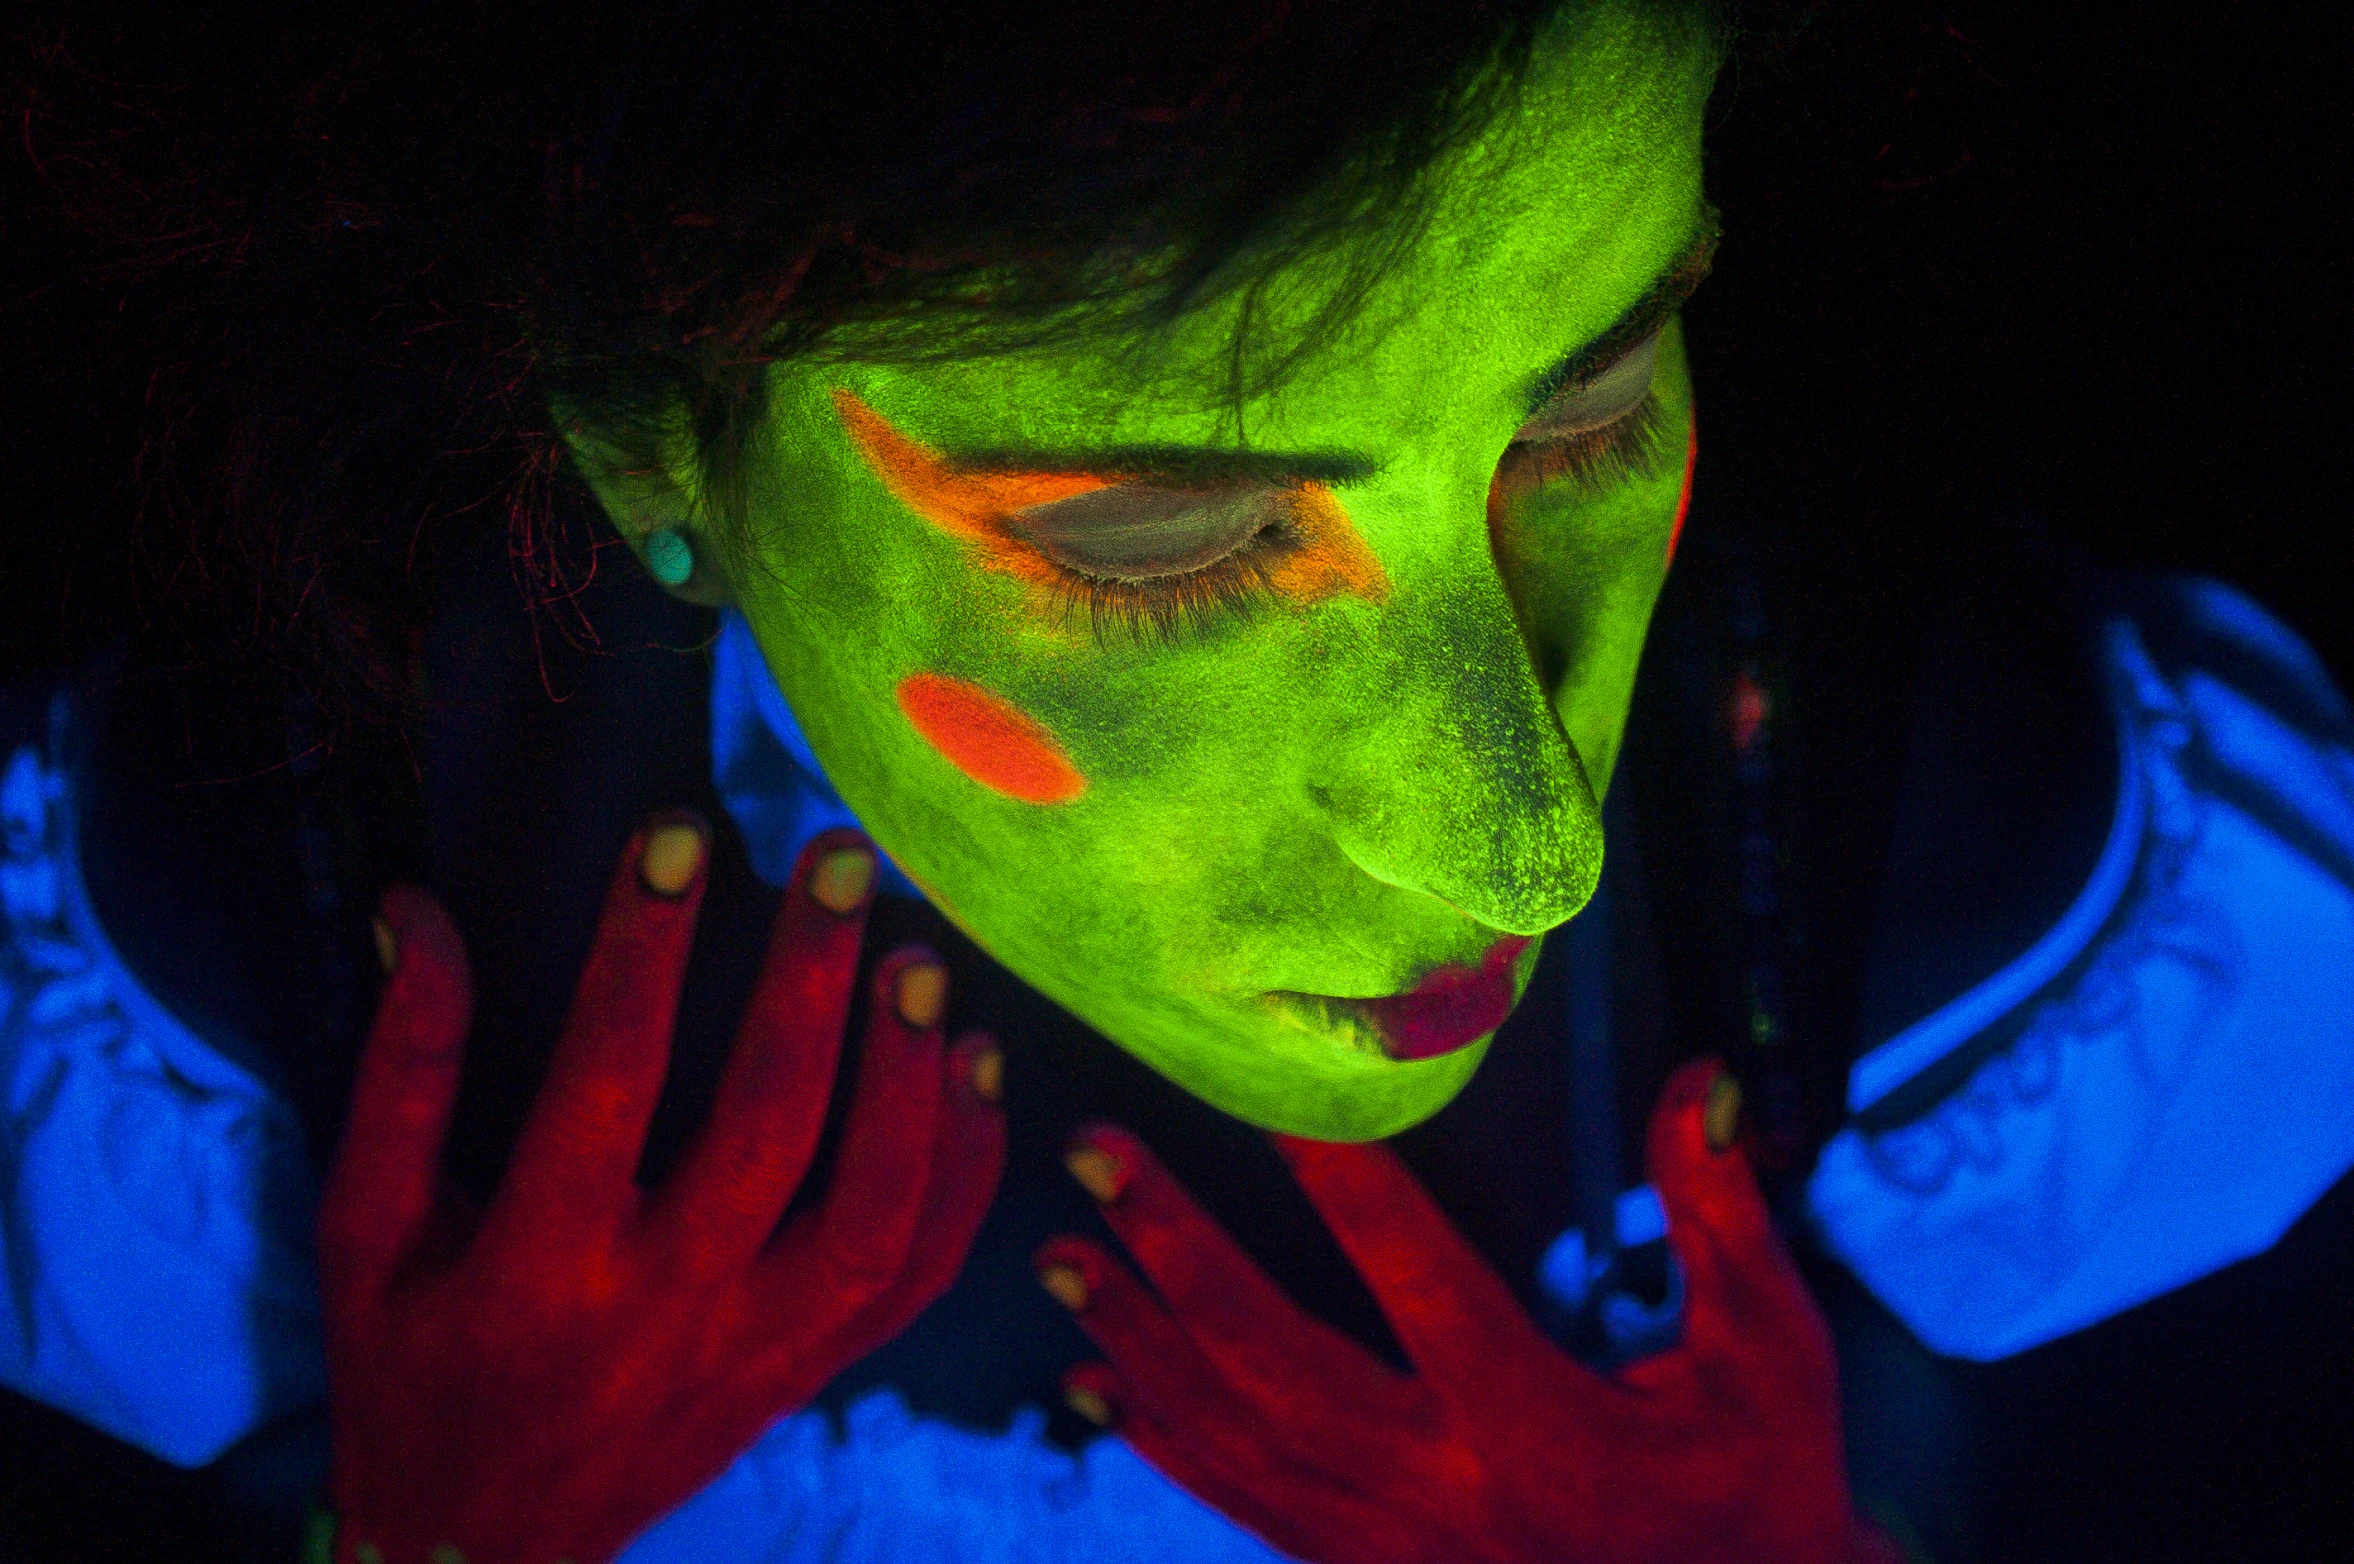 a young man with face paint and neon painted hands